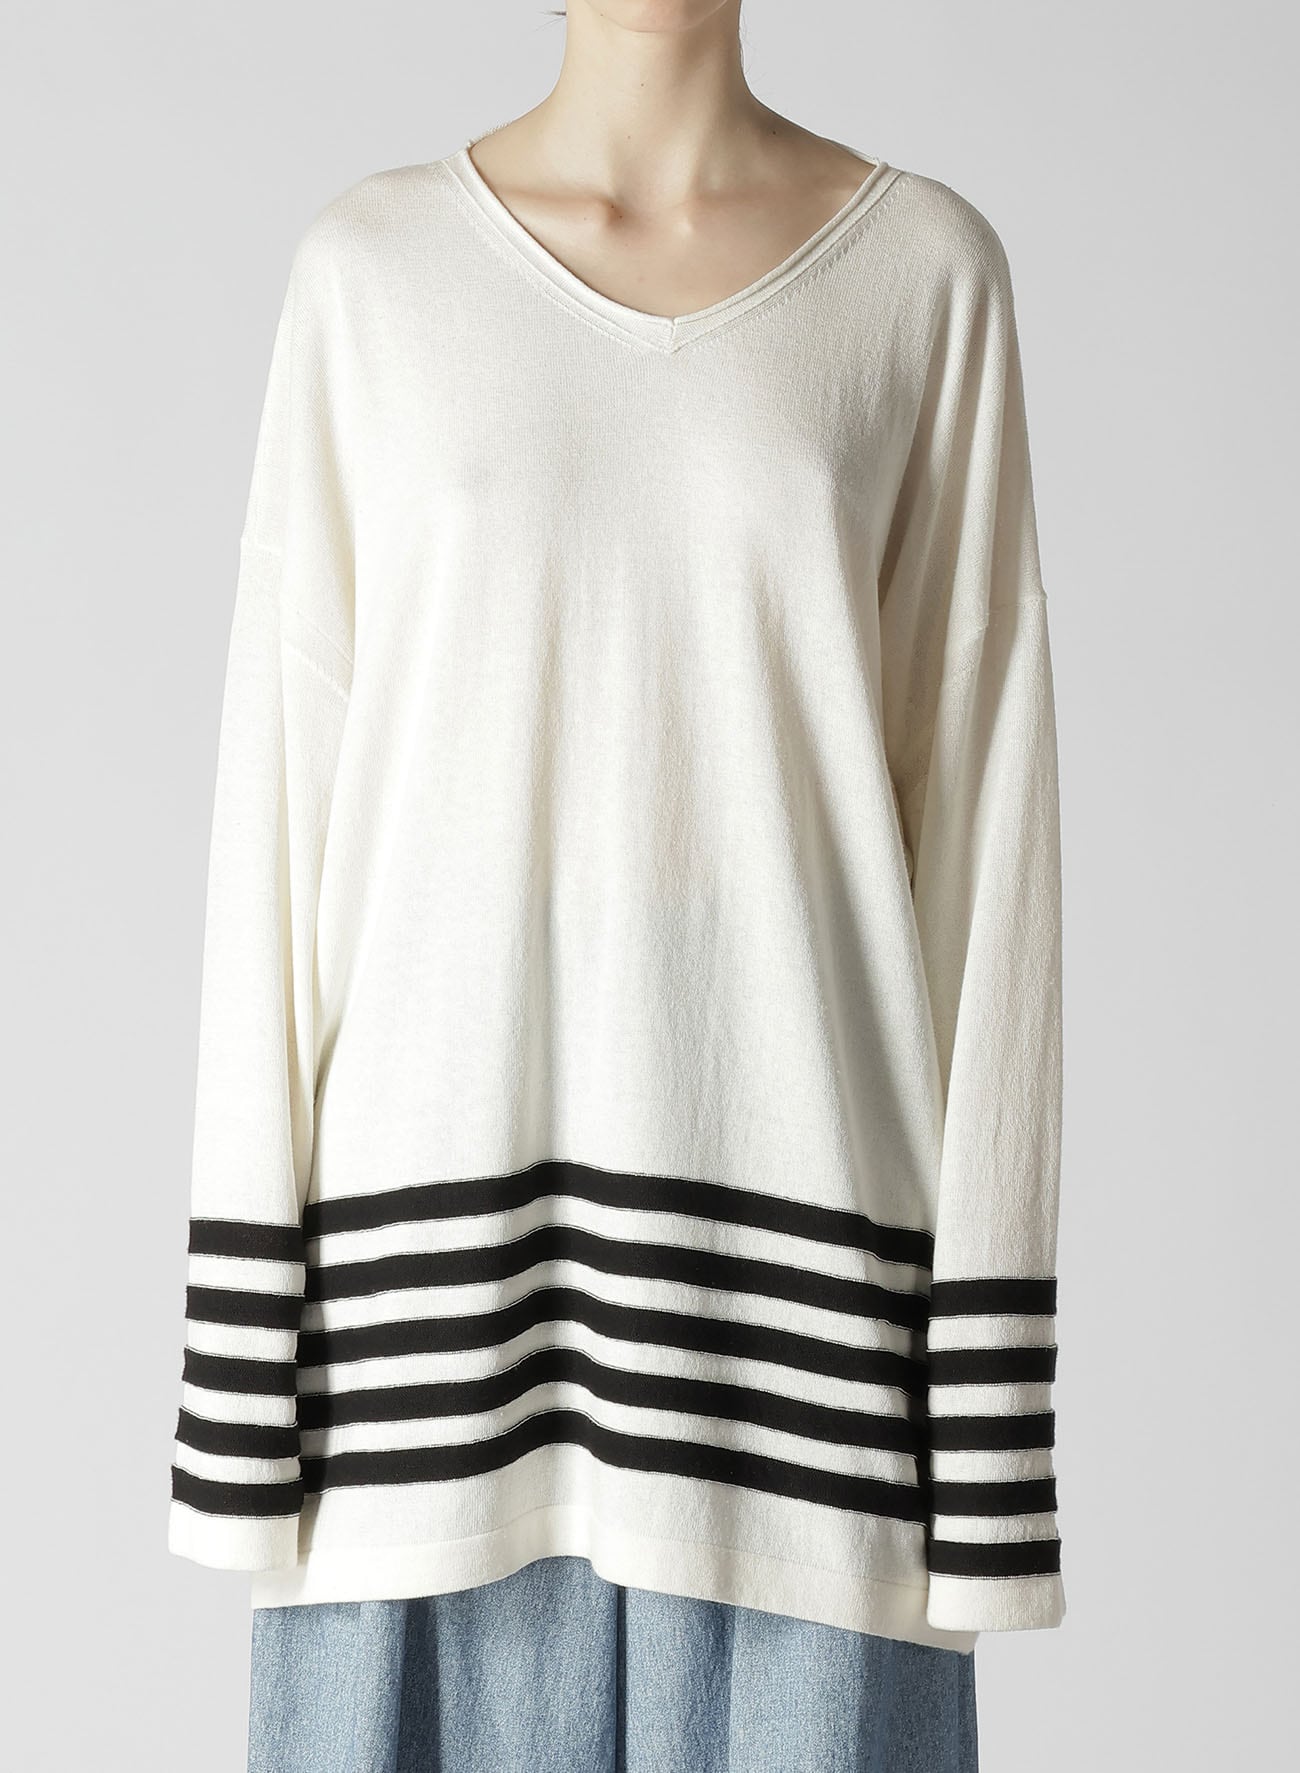 Ry/C TWISTED V NECK OVER SIZED PULLOVER KNIT(S White): Y's｜THE 